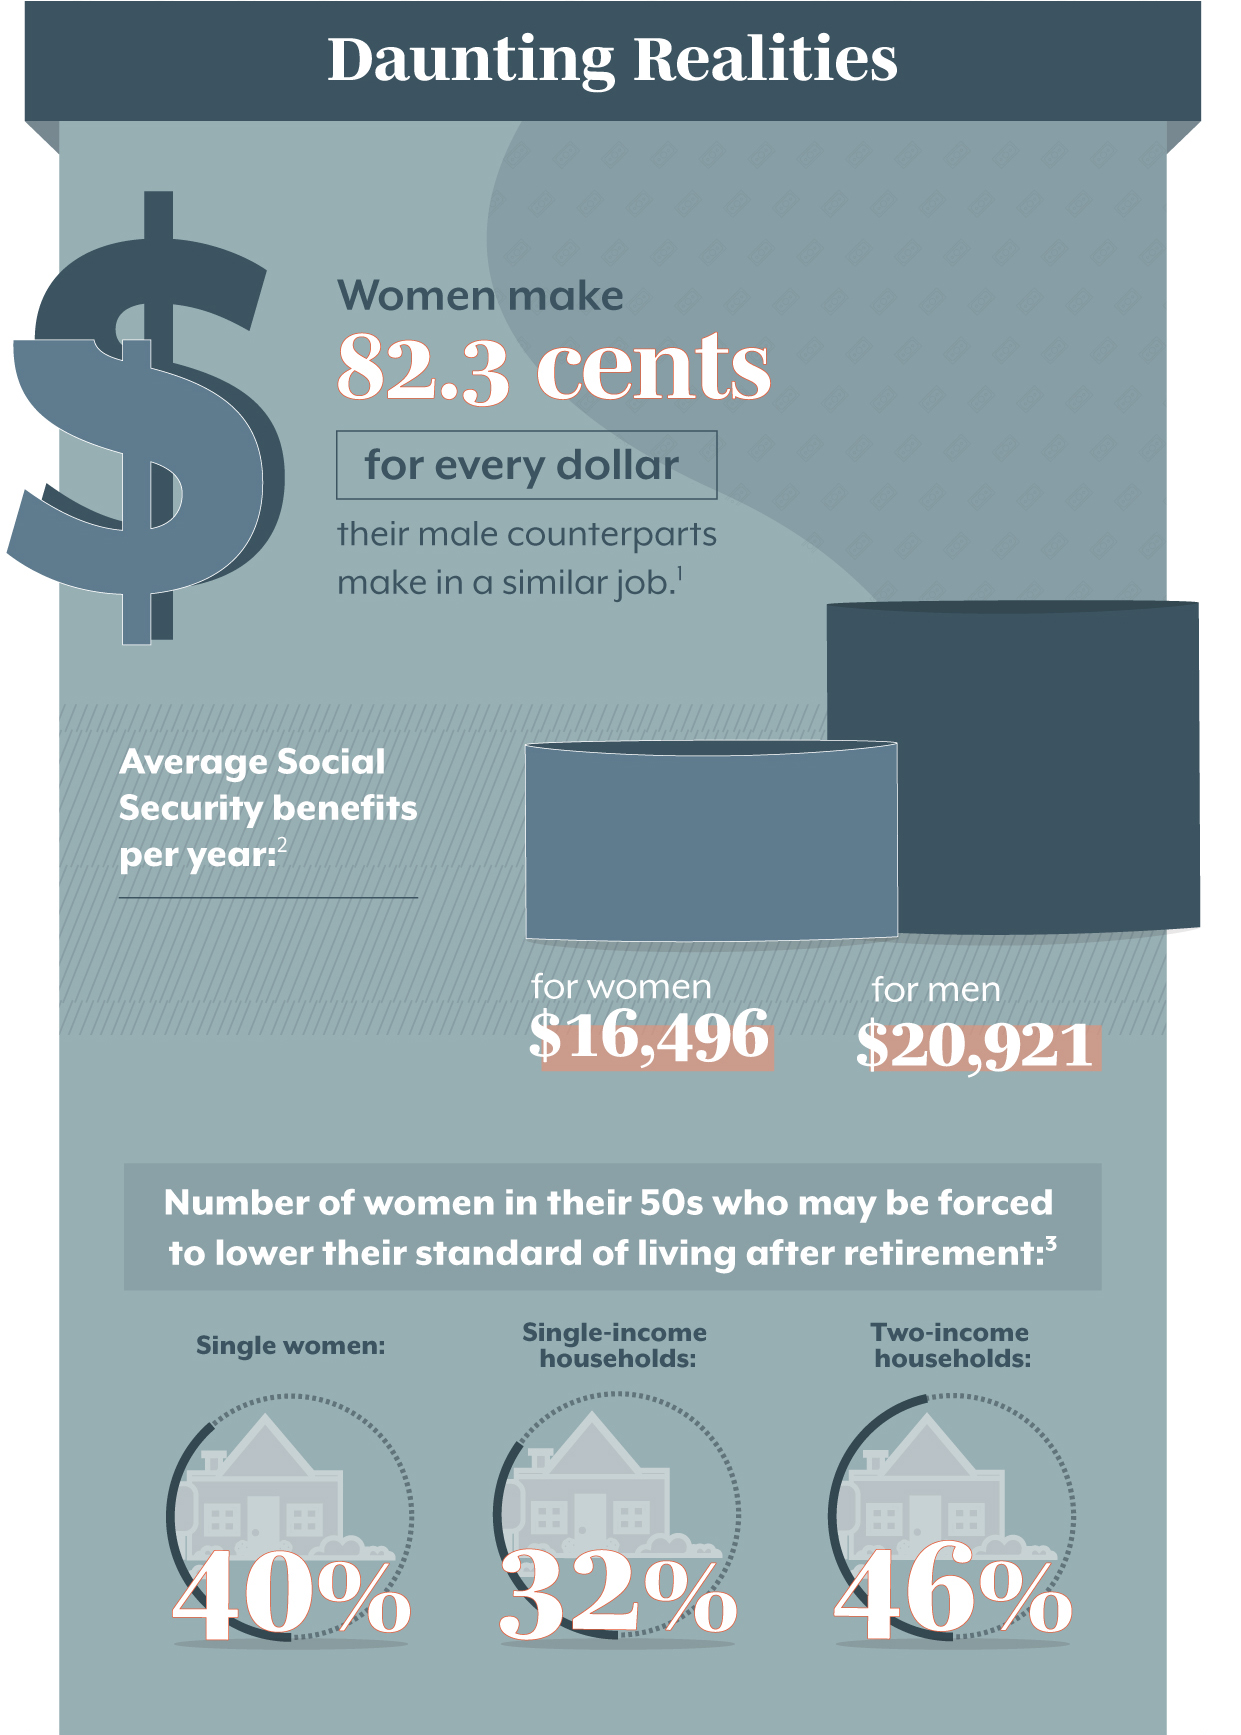 Daunting Realities Although history has seen some significant progress for women over the last century, there’s still a long way to go toward financial equality. Women make 82.3 cents for every dollar their male counterparts make in a similar job. (1) The average Social Security retired worker benefit for women is $16,496 per year, compared with $20,921 for men. (2) 46% of married women in their 50s in two-income households are at risk of being unable to maintain their standard of living in retirement. 32% of married women in their 50s in one-income households are at risk of being unable to maintain their standard of living in retirement. 40% of single women in their 50s are at risk of being unable to maintain their standard of living in retirement. (3)